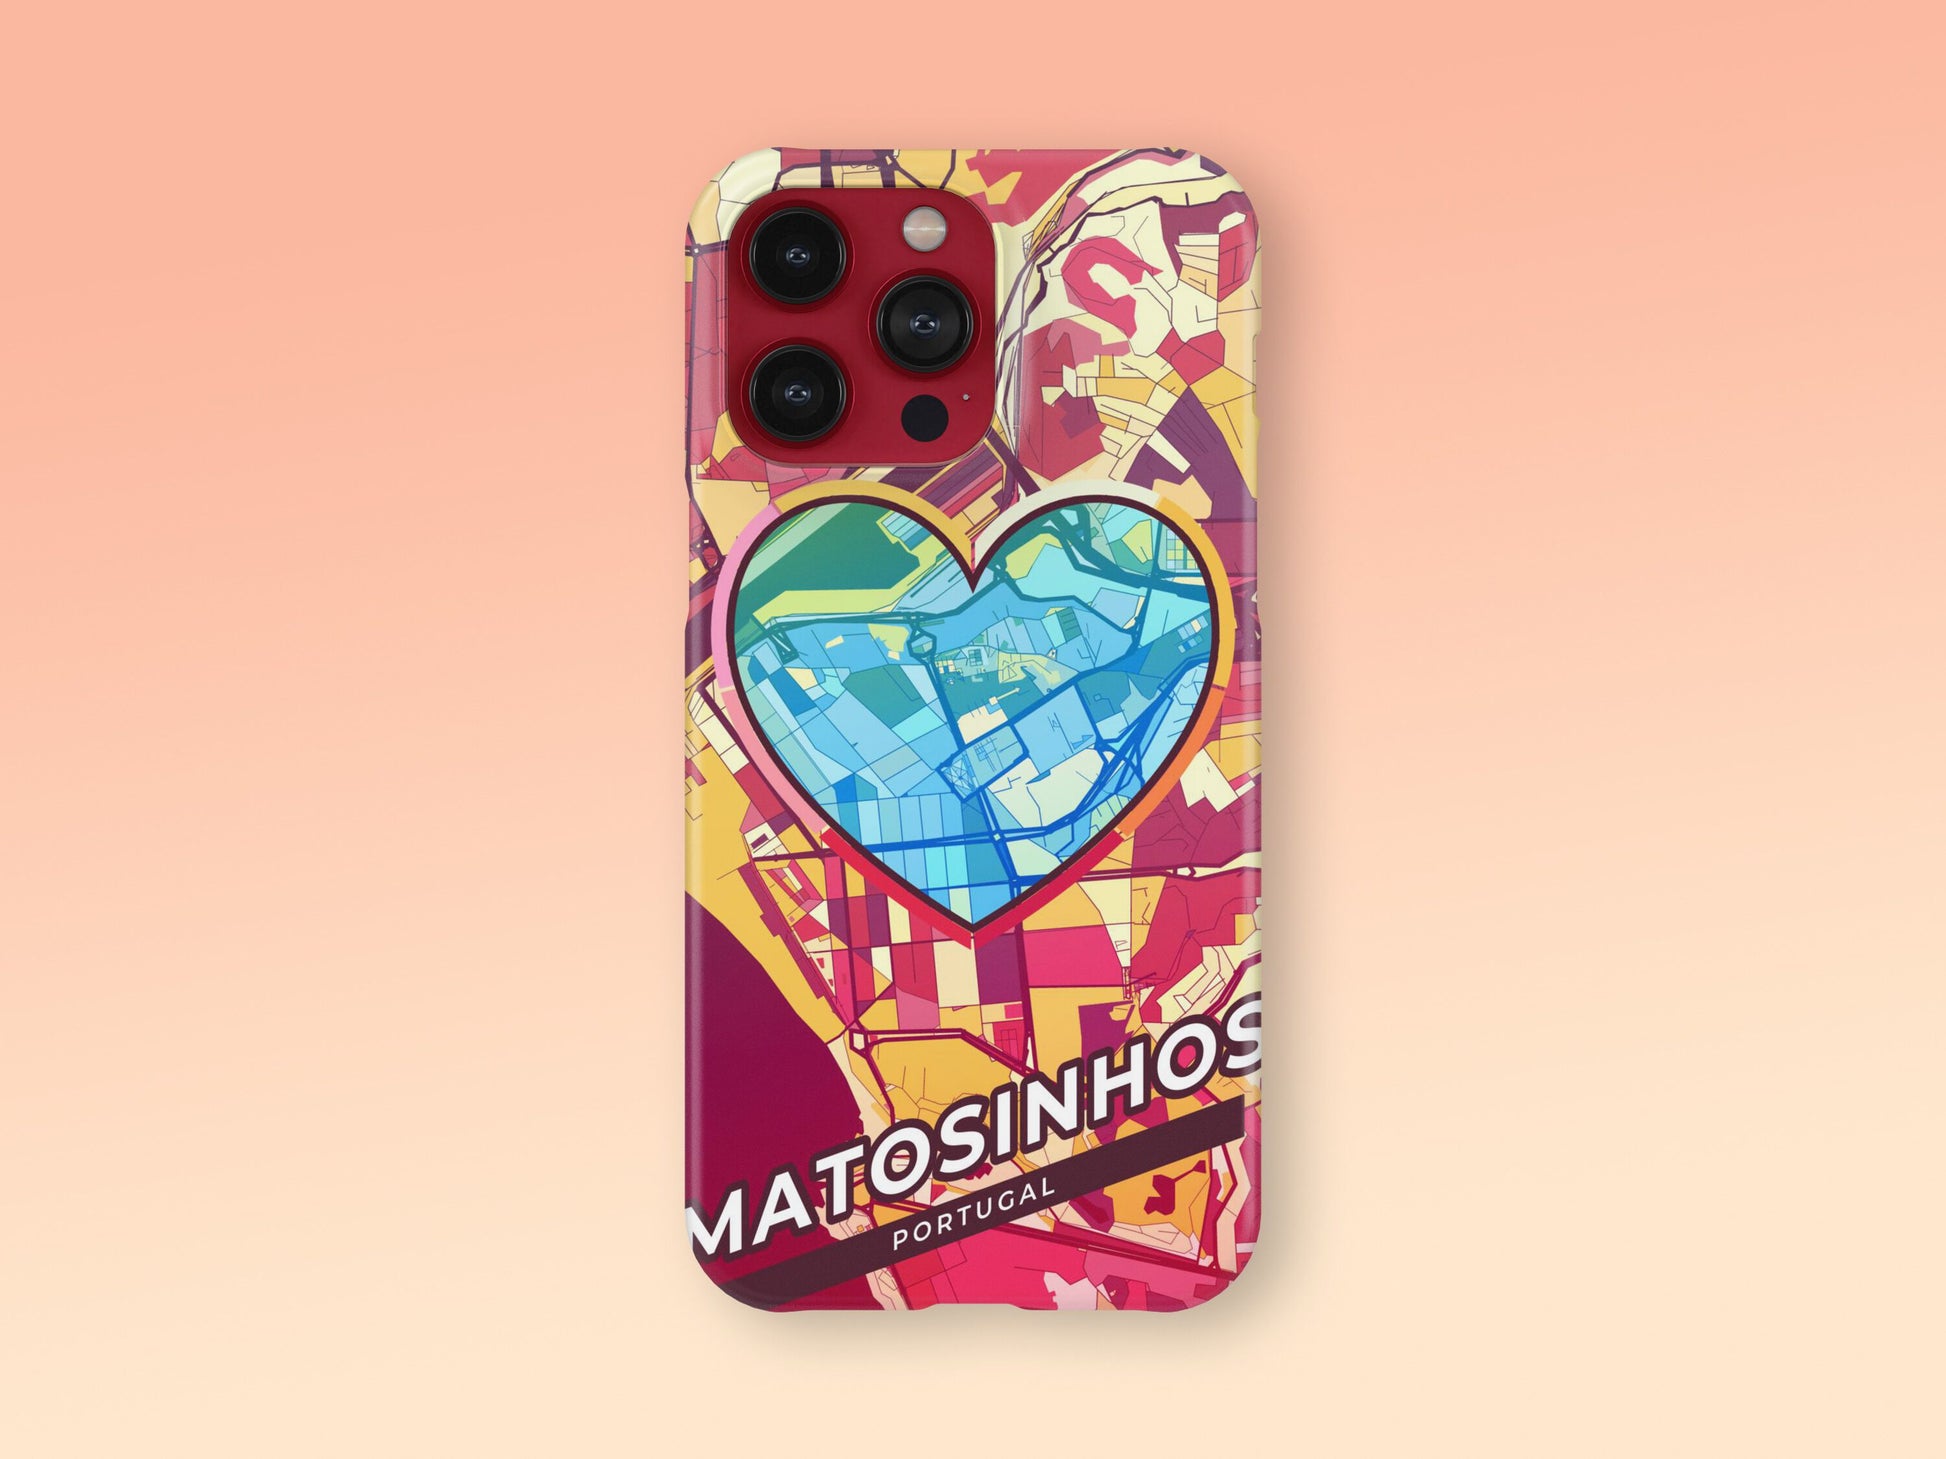 Matosinhos Portugal slim phone case with colorful icon. Birthday, wedding or housewarming gift. Couple match cases. 2